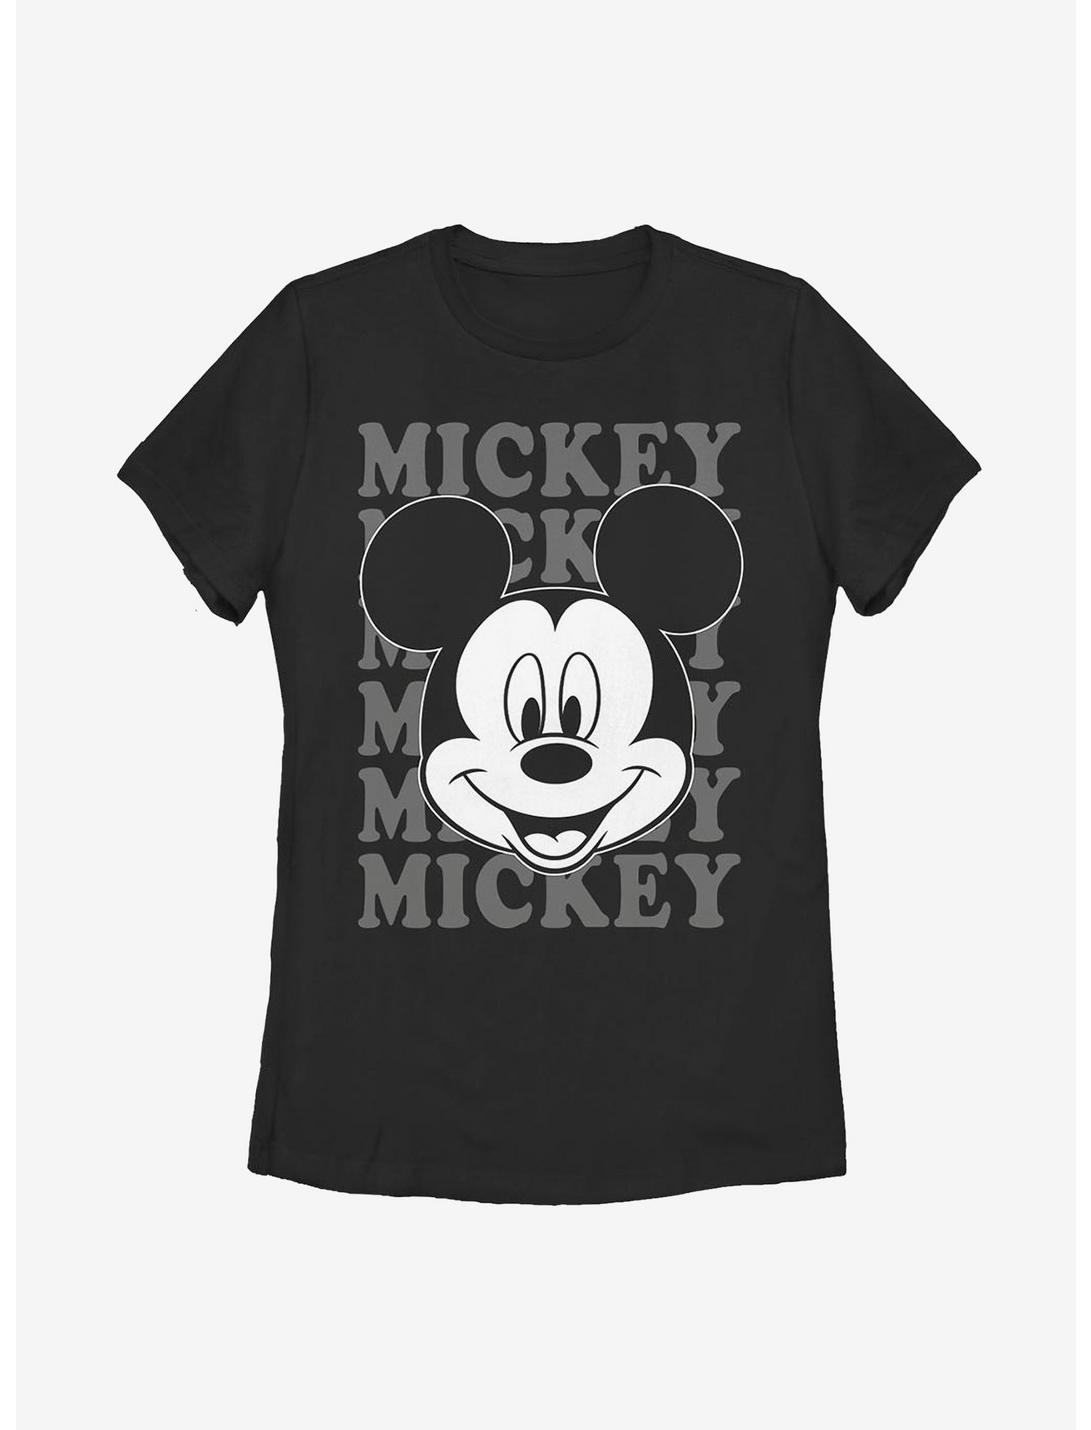 Disney Mickey Mouse All Name Womens T-Shirt, BLACK, hi-res